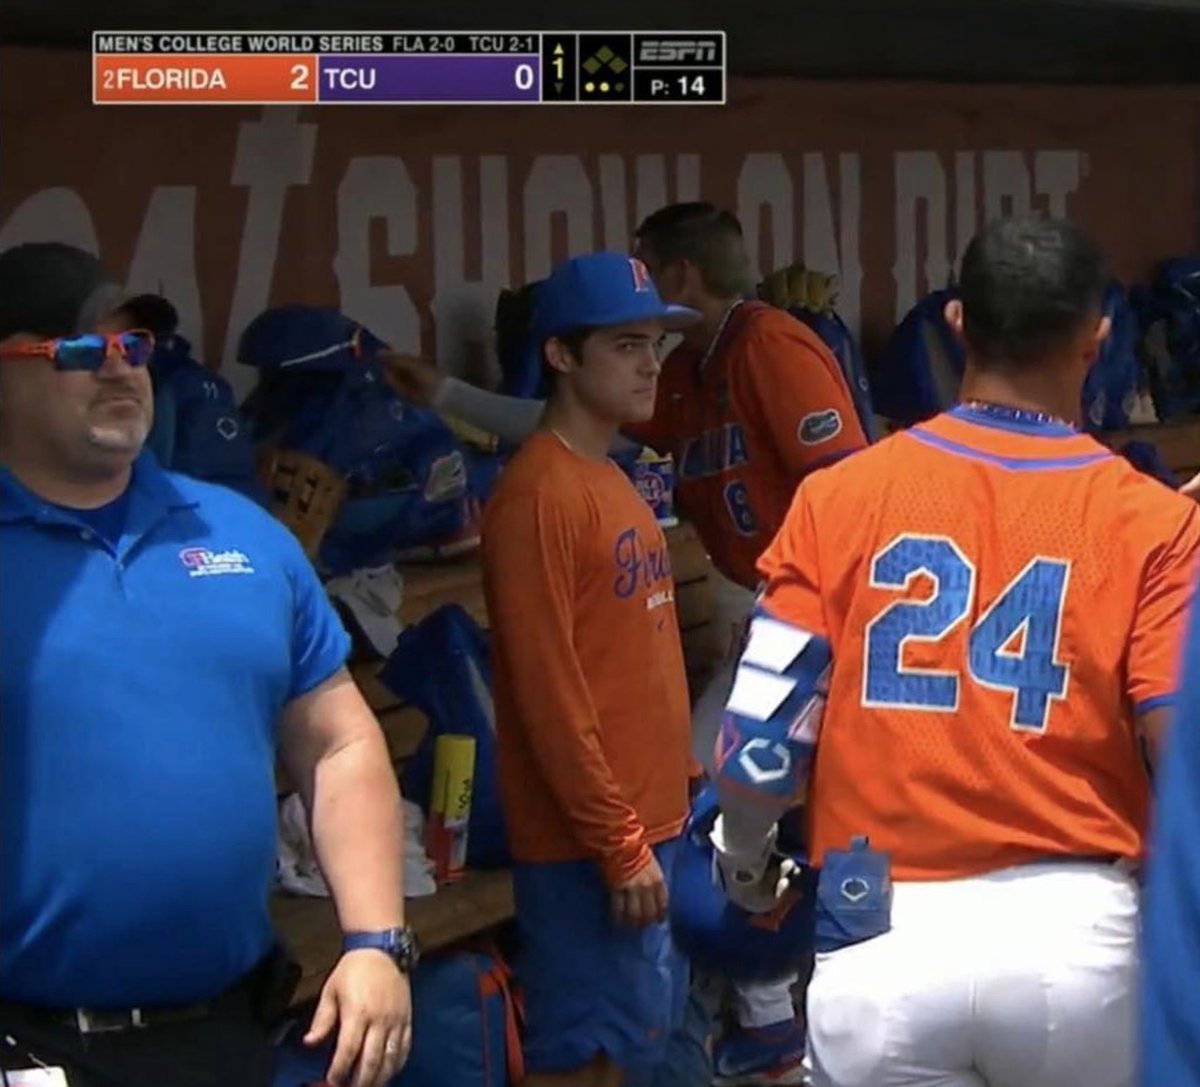 Dr. Kevin Farmer, the incredible team physician of @GatorsBB, keeping it real in the dugout! Much appreciation to @kevinfarmermd and @UFortho for ensuring our team stays in top shape! We are heading to the College World Series finals!